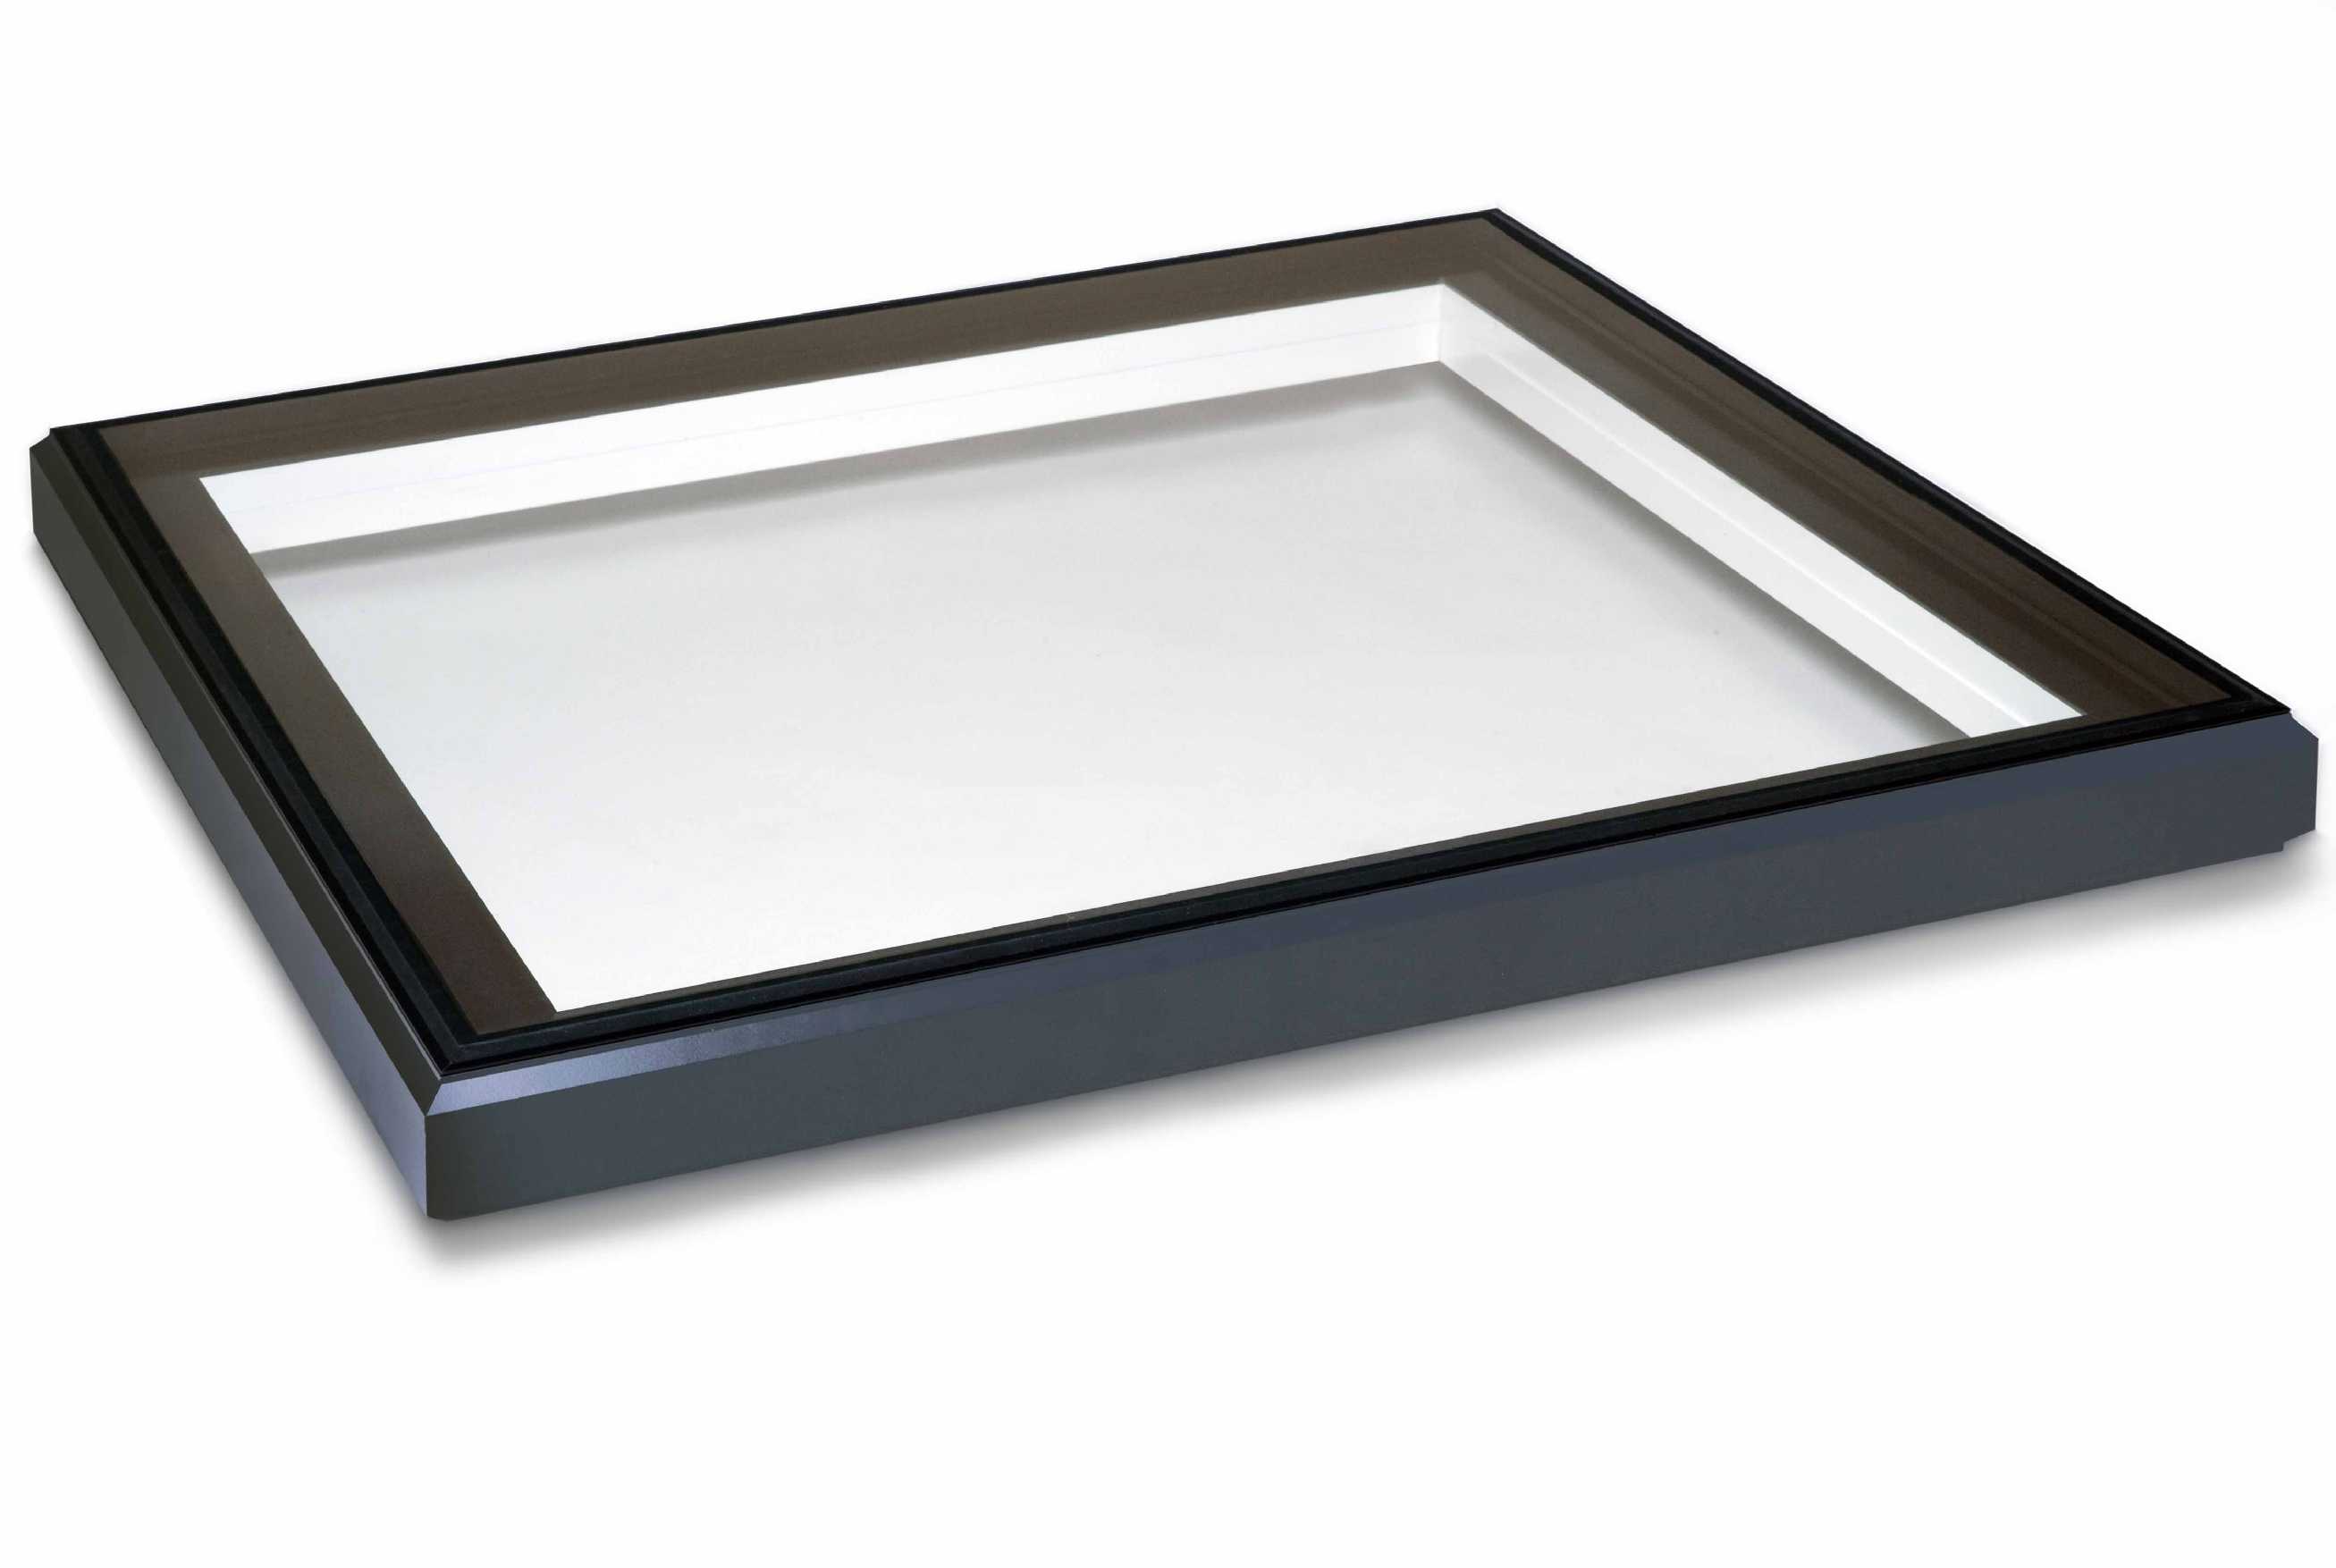 Buy EcoGard Flat Roof light, Double Glazed, Electric Opening, 1,000mm x 1,000mm online today